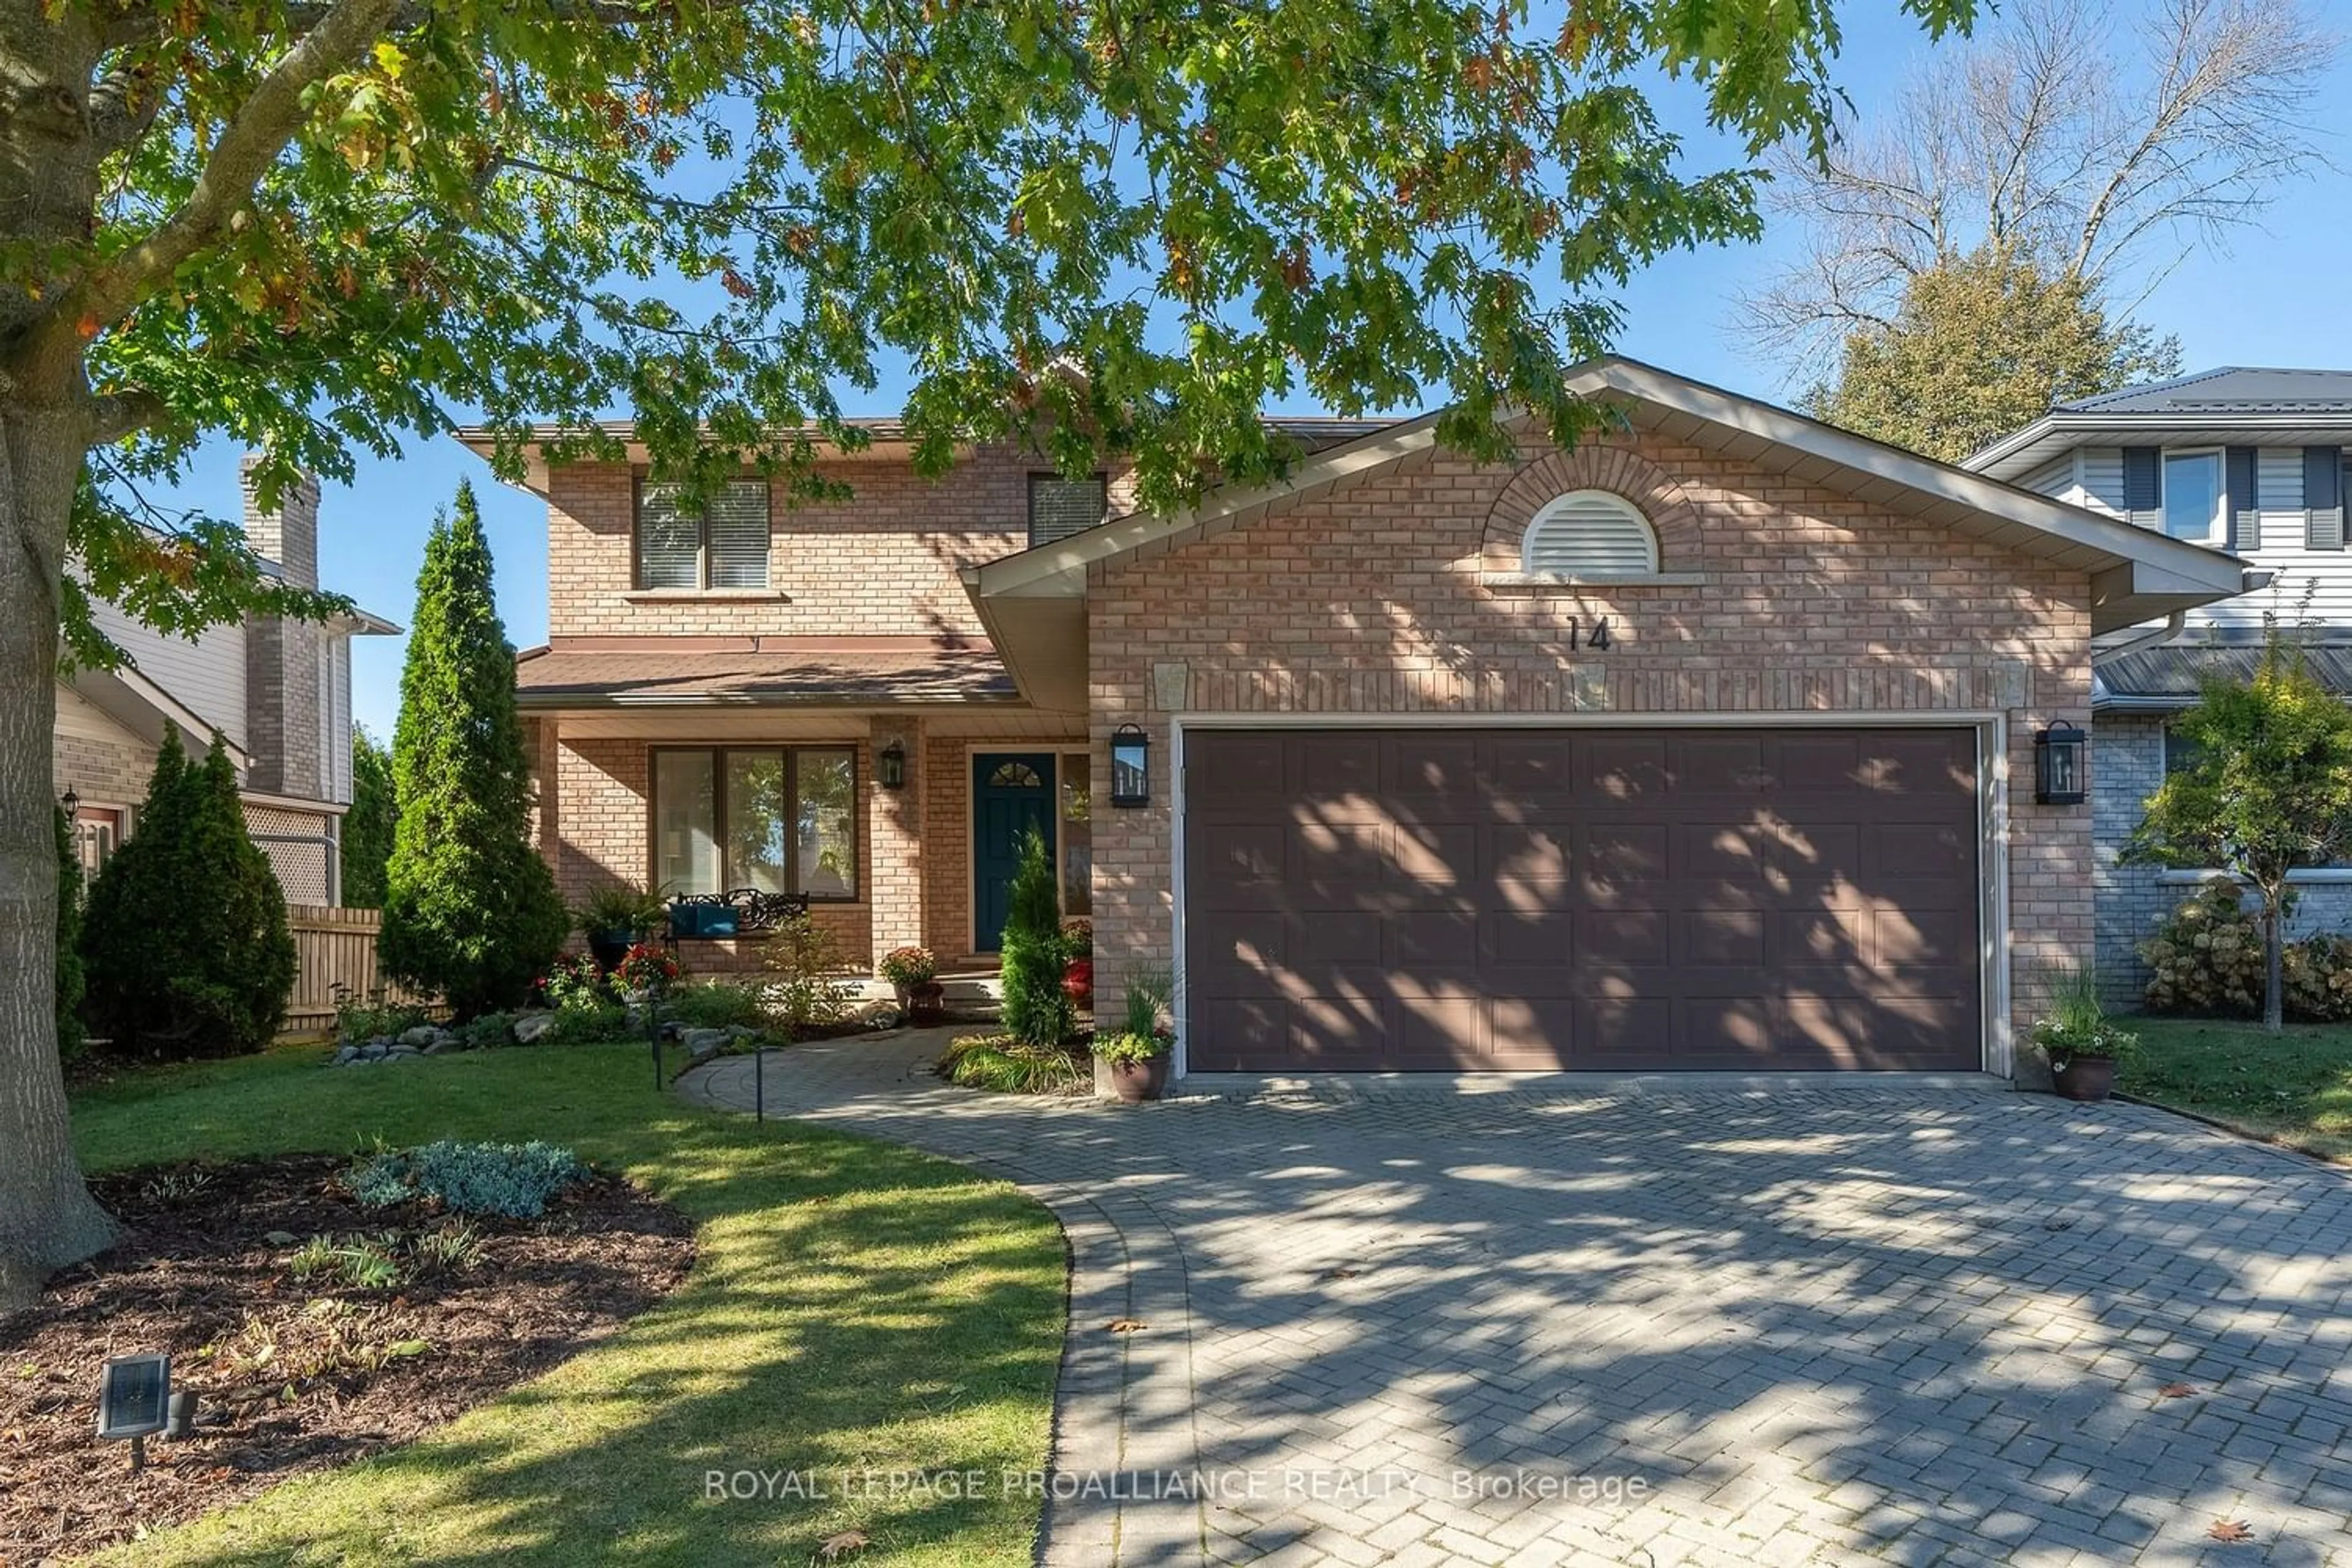 Home with brick exterior material for 14 Forchuk Cres, Quinte West Ontario K8V 6N1